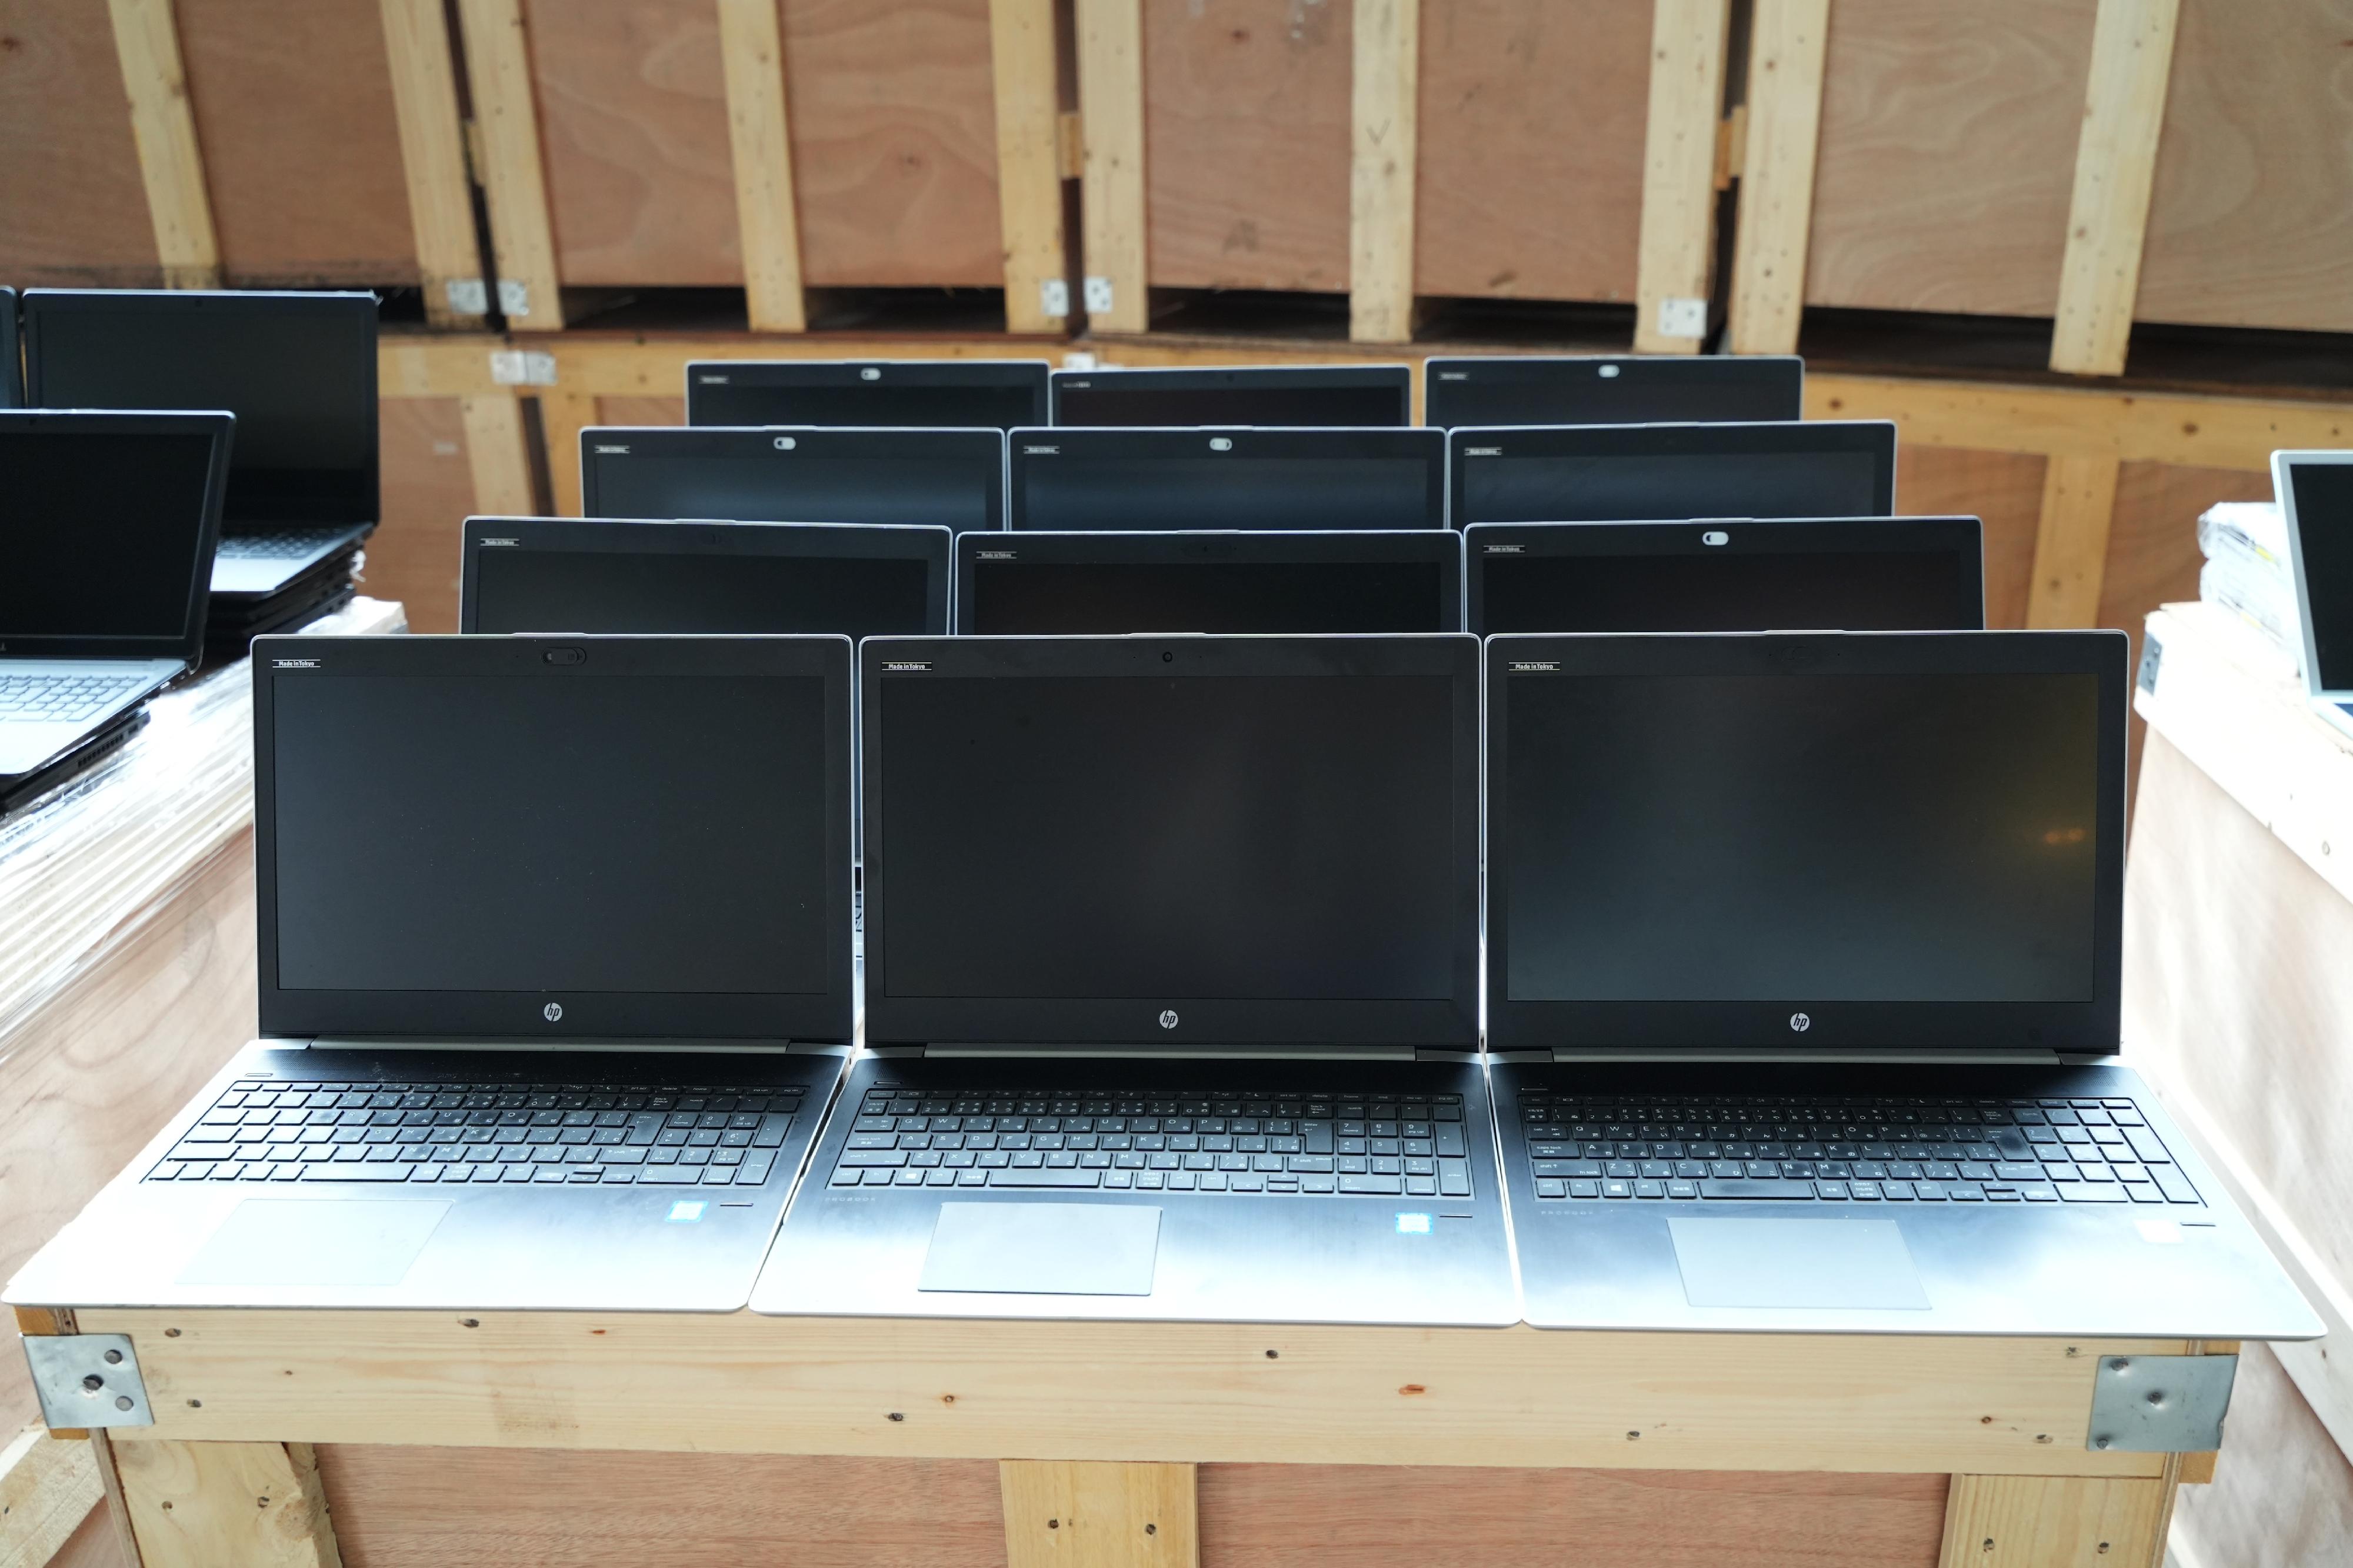 Hong Kong Customs on March 27 detected a suspected smuggling case involving an outgoing container truck at the Man Kam To Control Point and seized about 510 000 suspected smuggled electronic products and electronic parts with a total estimated market value of about $30 million. Photo shows some of the suspected smuggled notebook computers seized.